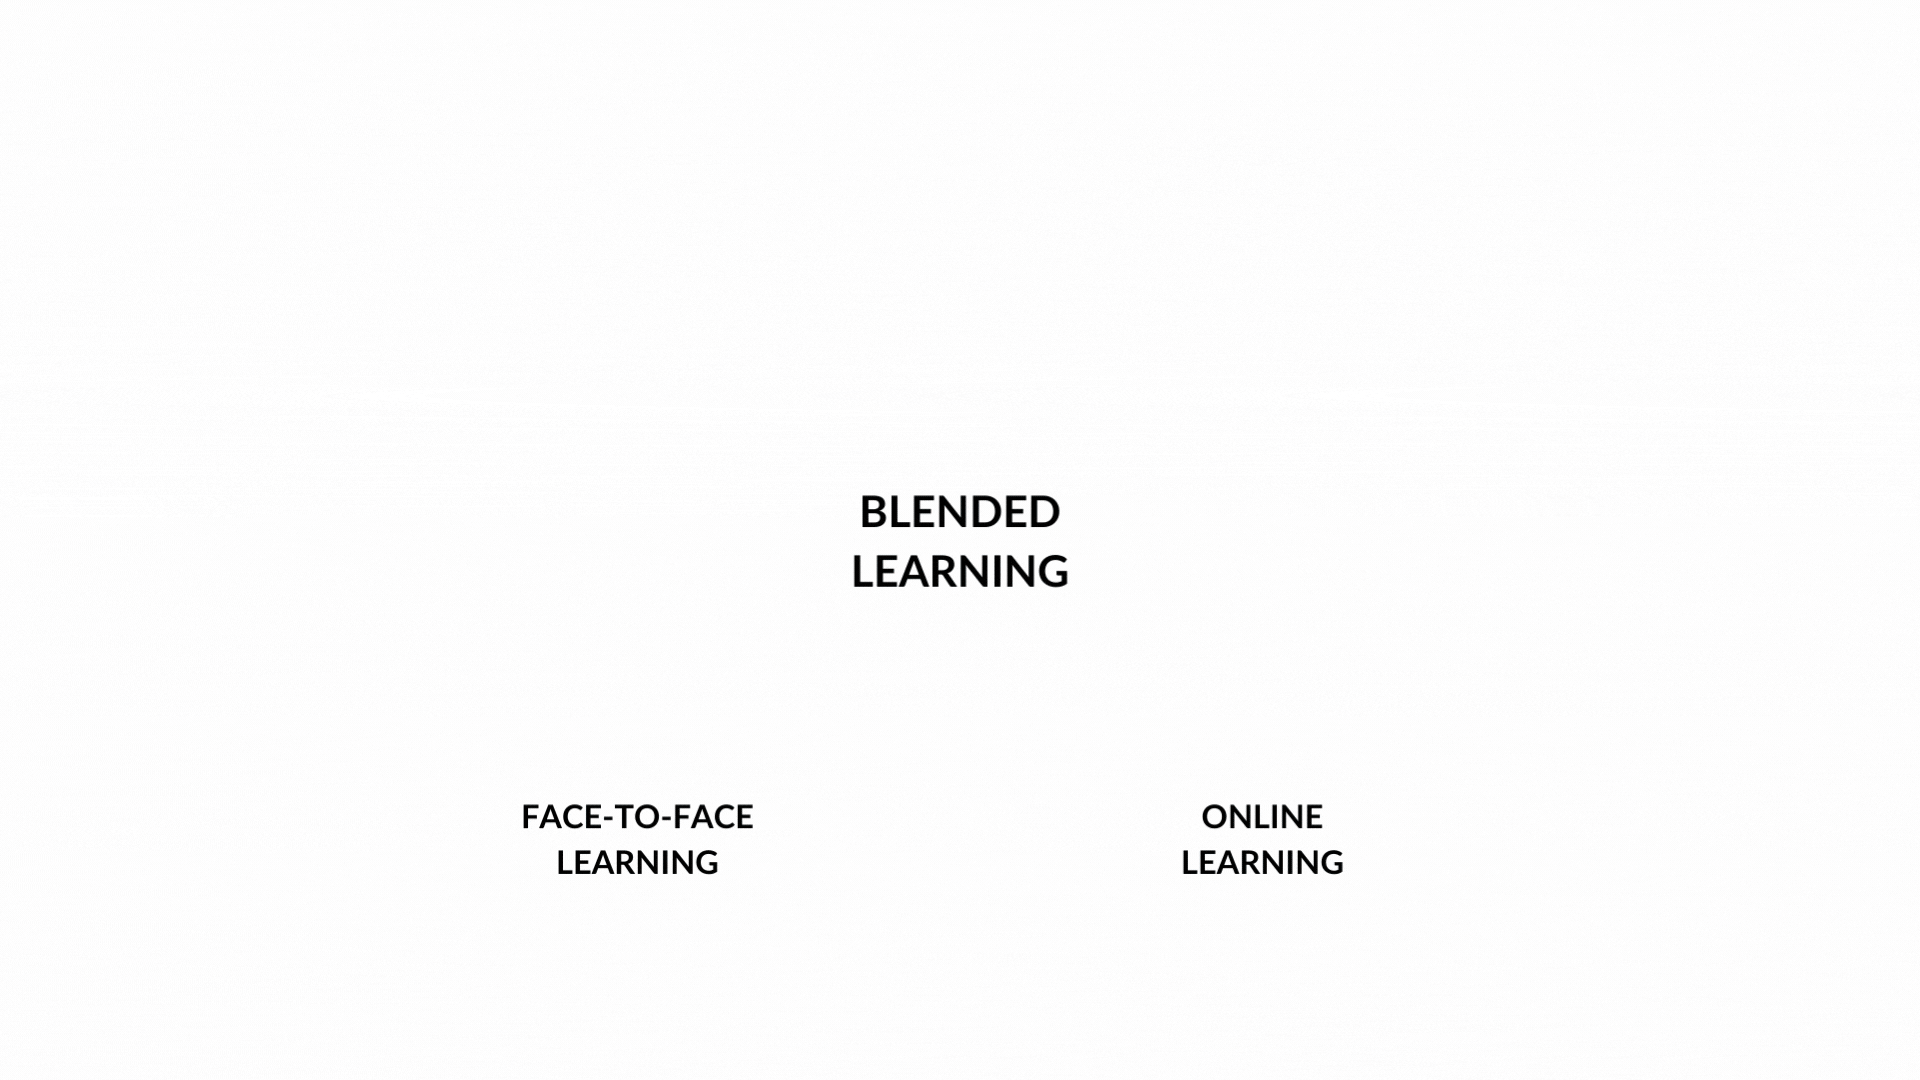 Blended learning is a learning method combining online lessons and face-to-face training activities.